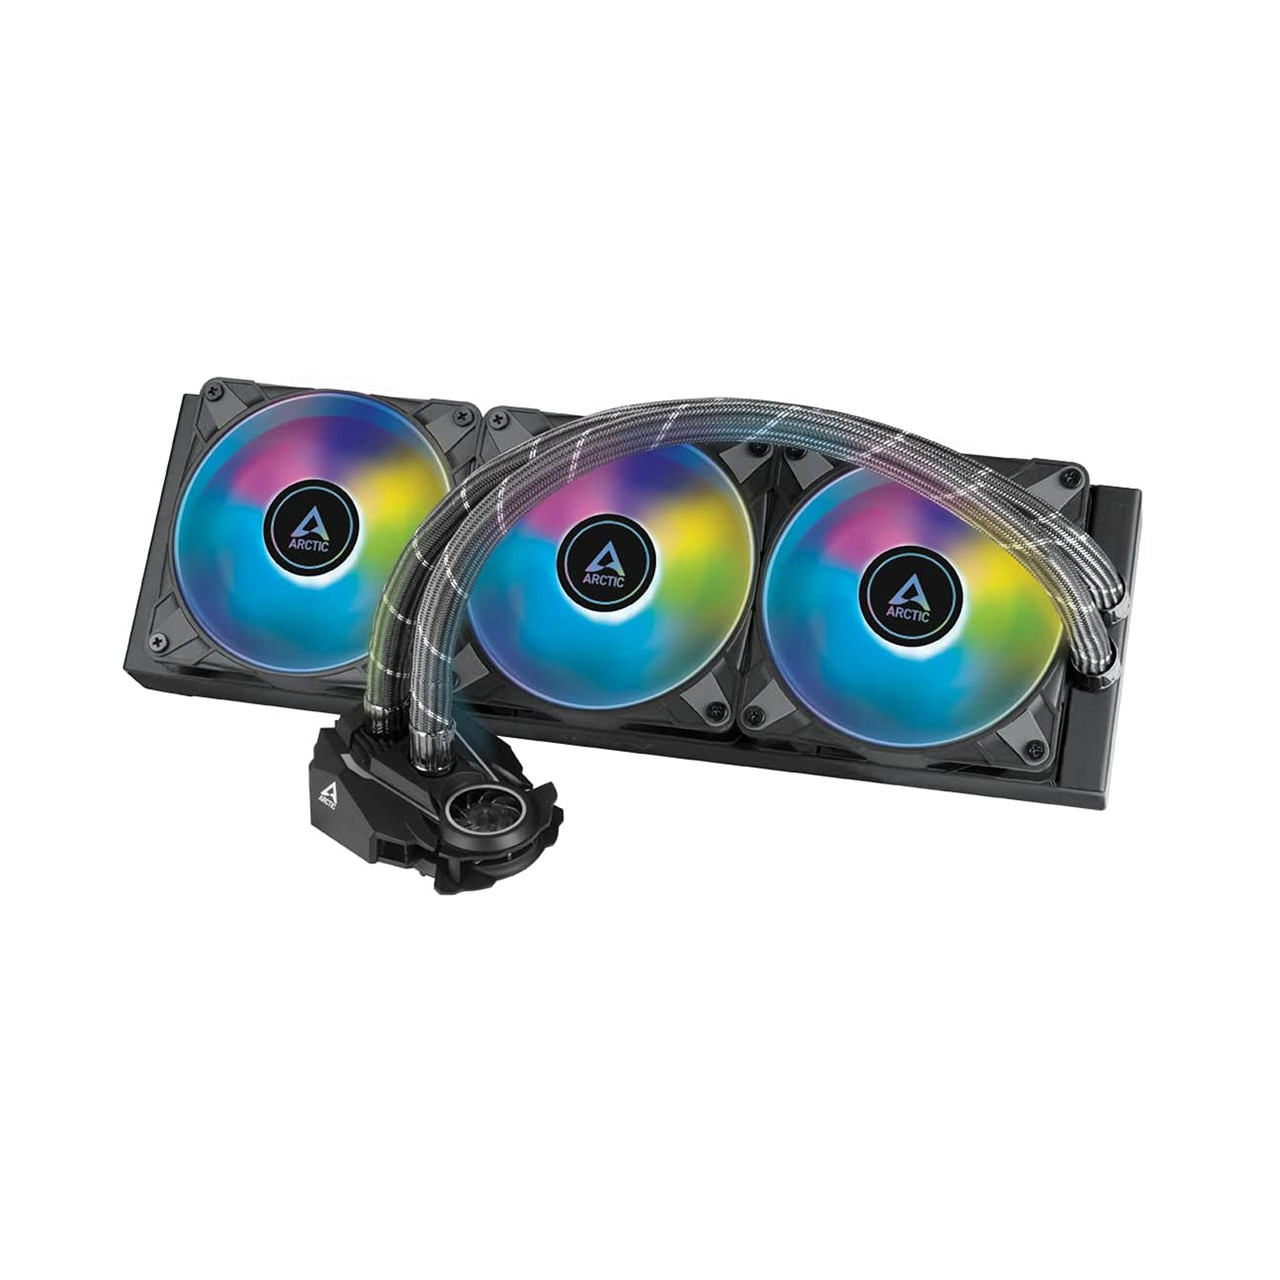 ARCTIC Liquid Freezer II 360 A-RGB - Multi-Compatible All-in-one A-RGB CPU AIO Water Cooler, Black ACFRE00101A